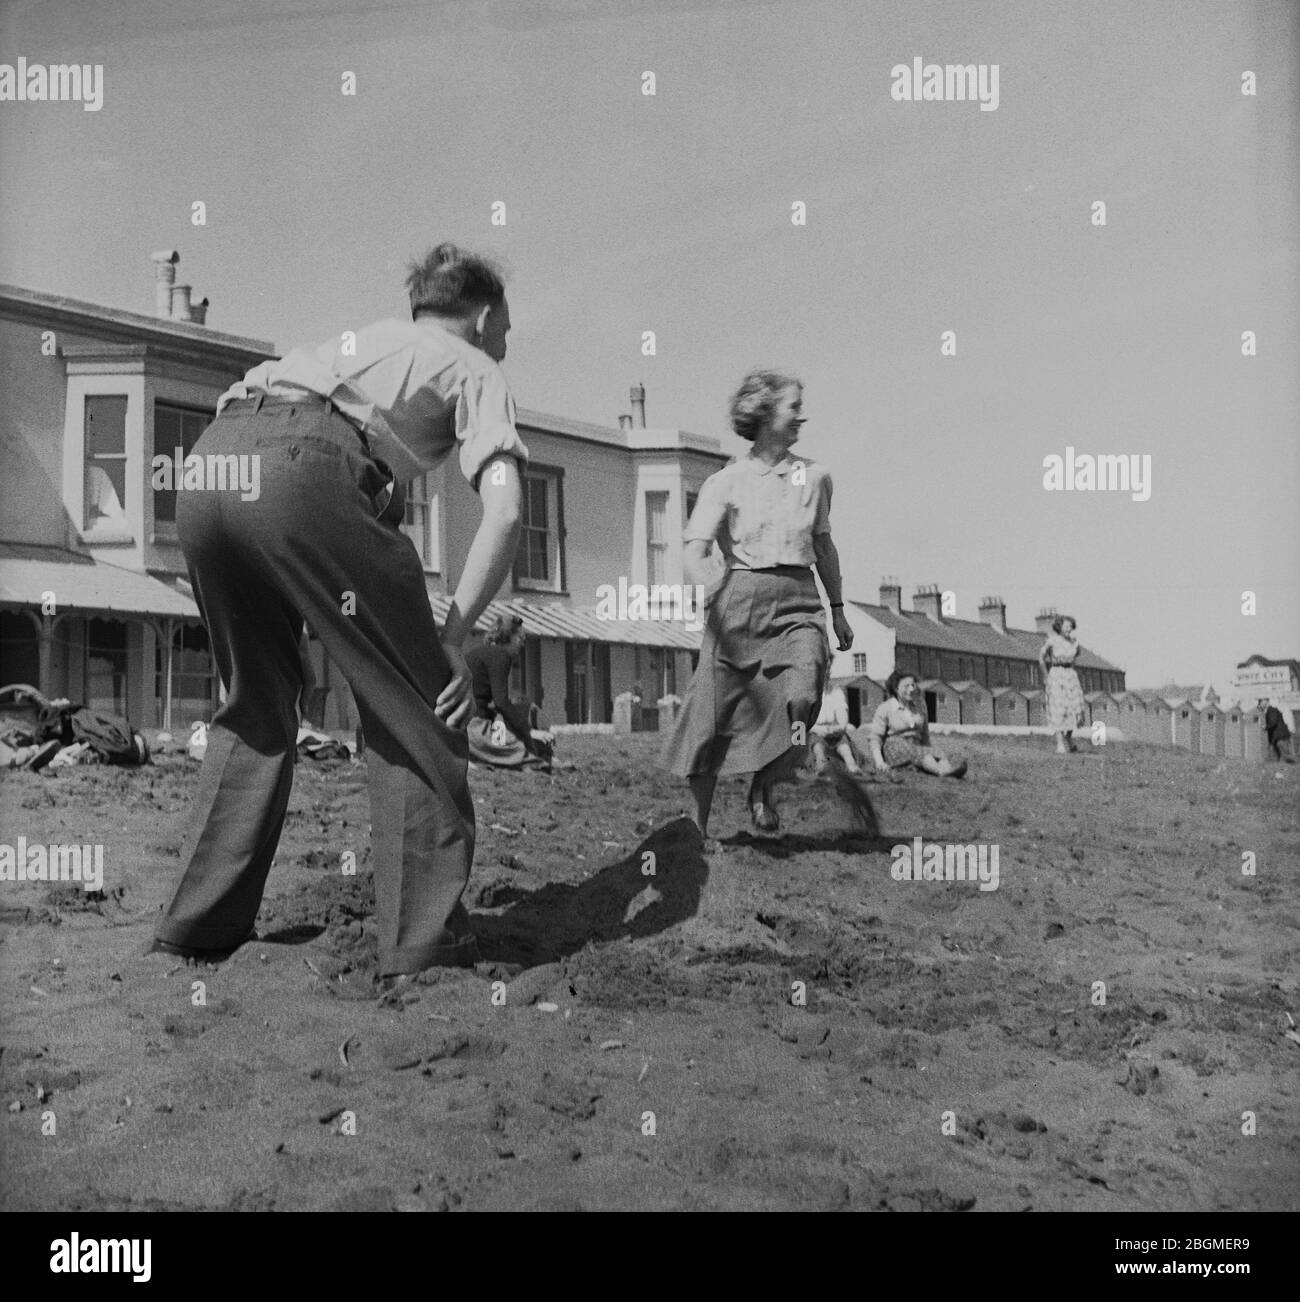 1950s, historical, people on a works outing playing on a beach in their civilian clothing, Ryde, Isle of Wight, England, UK. Stock Photo